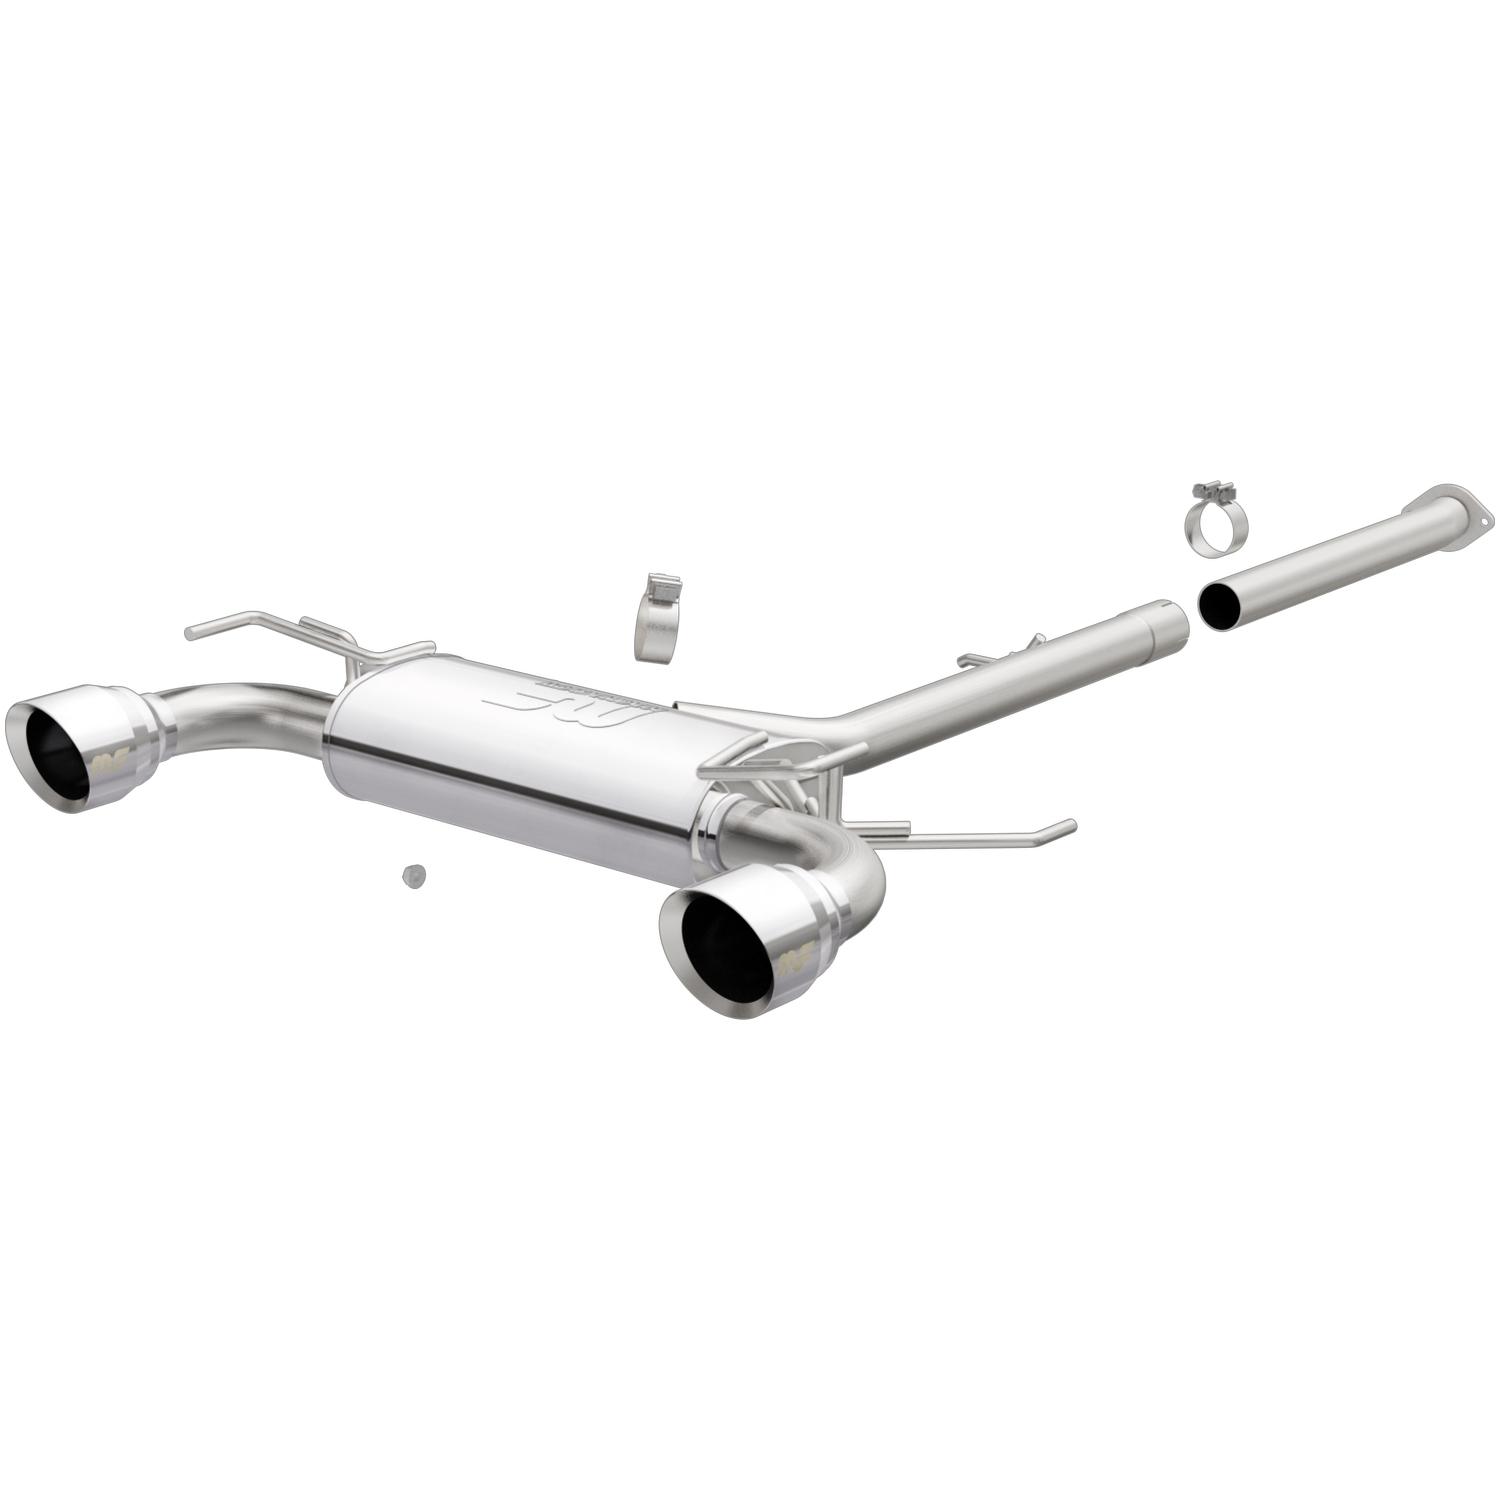 street-series-stainless-cat-back-system